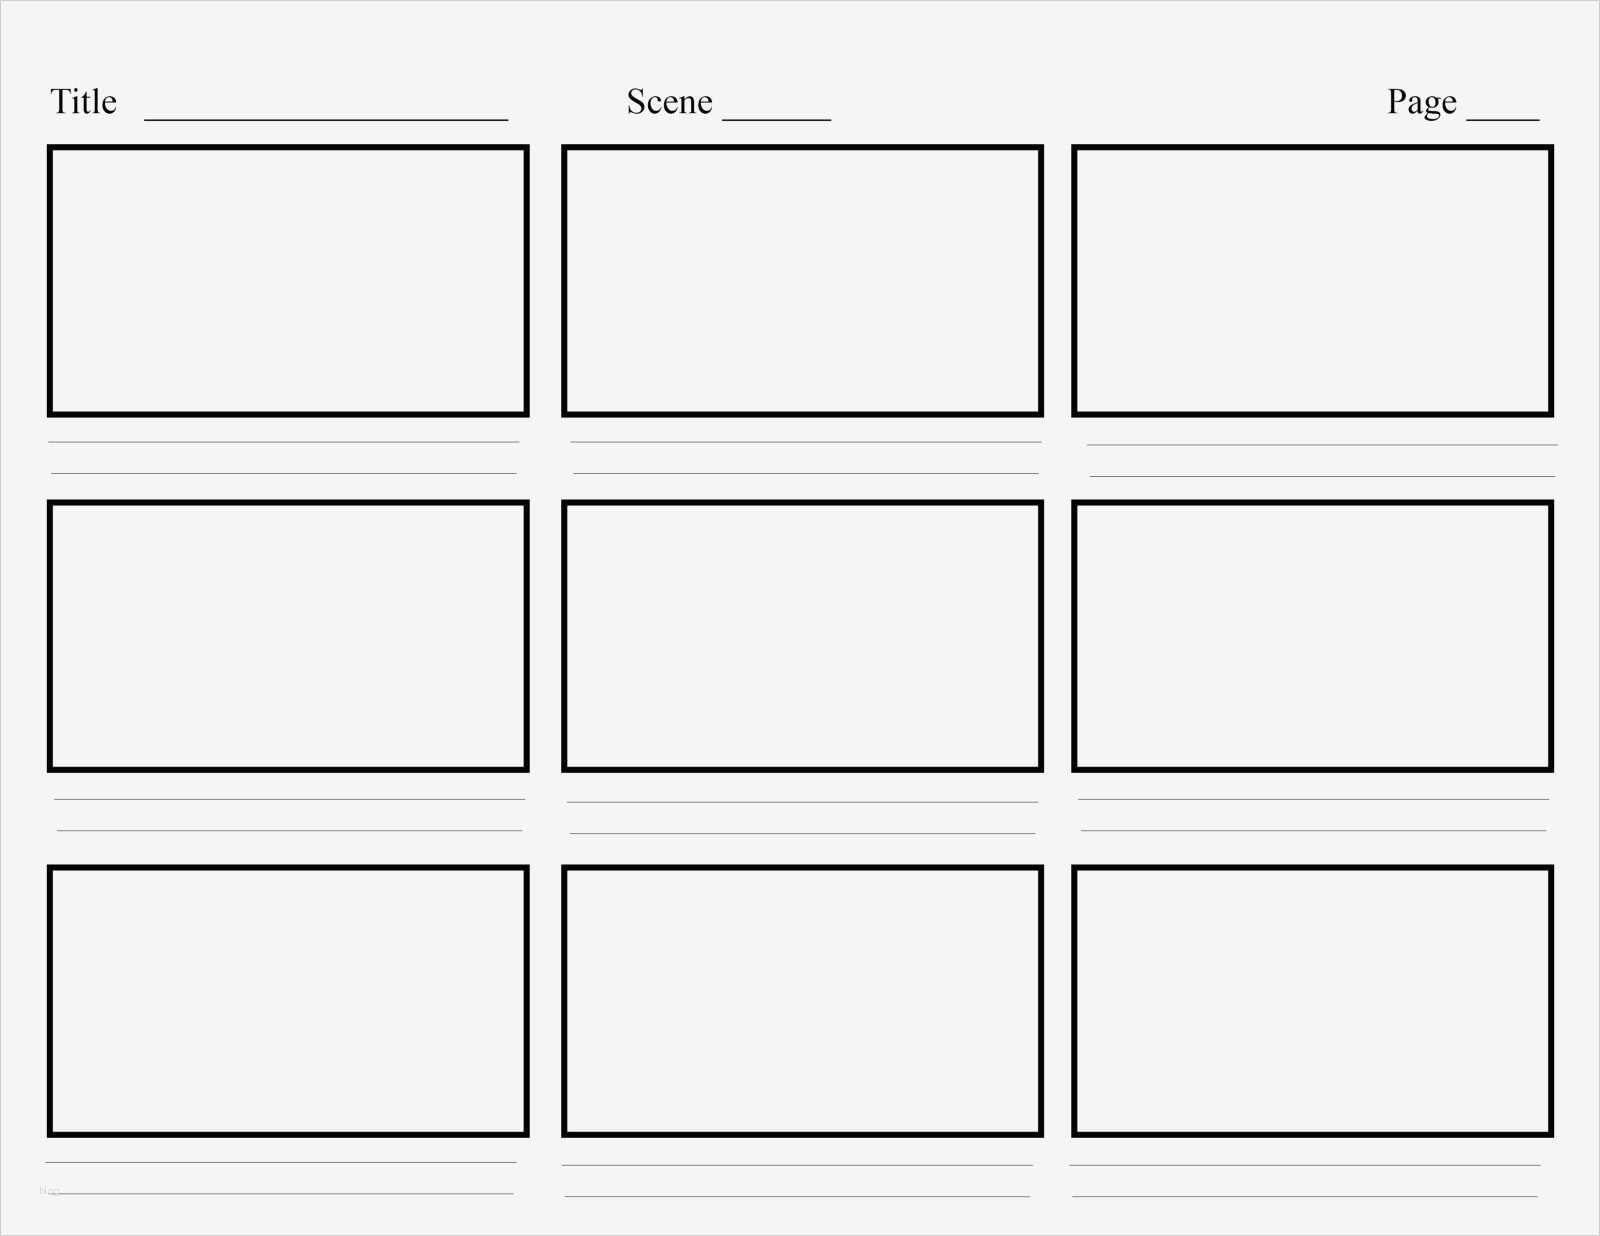 storyboard pro software free download